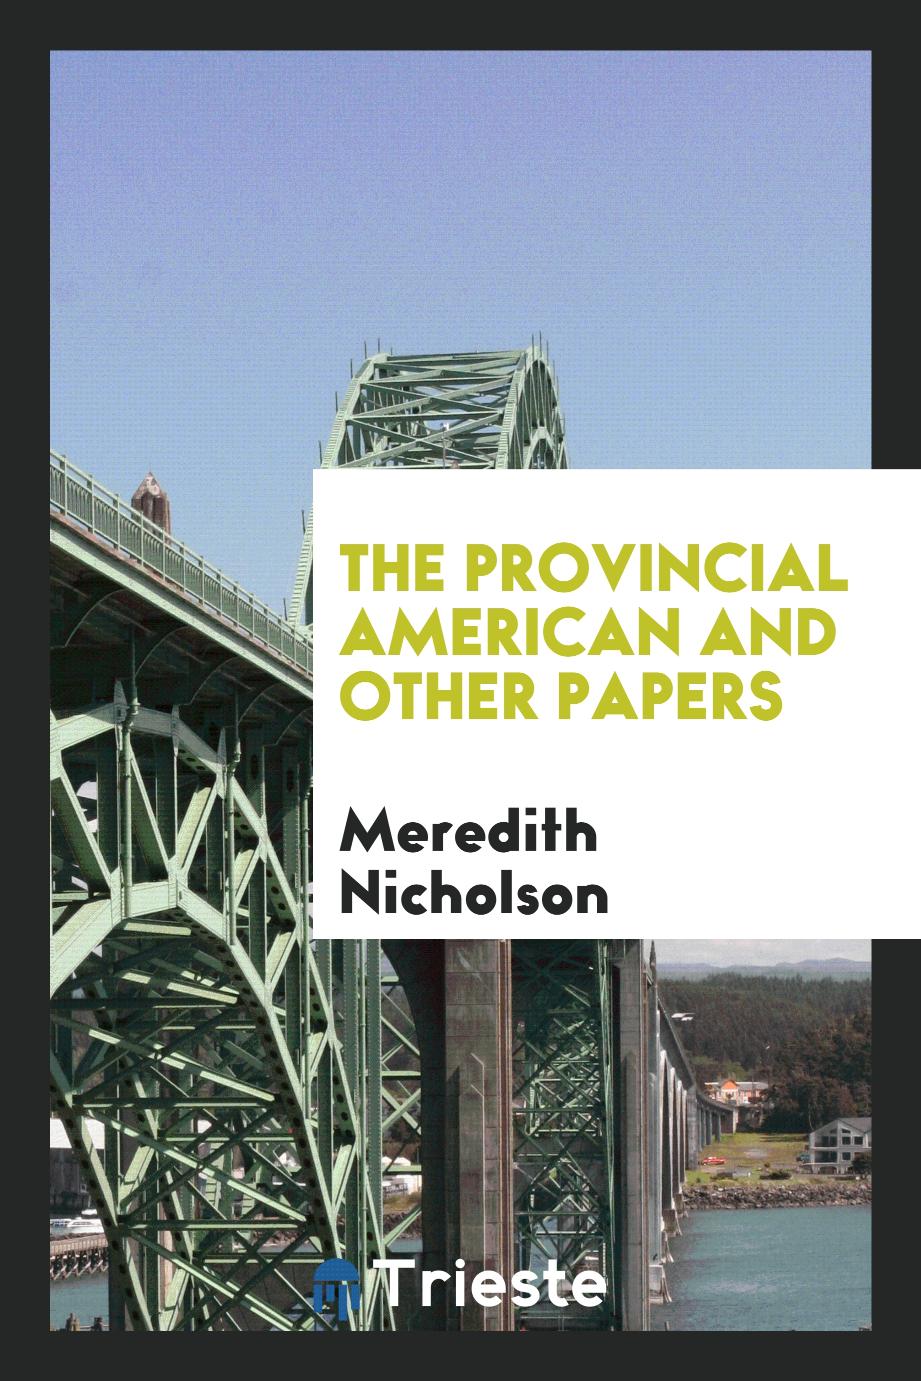 The provincial American and other papers